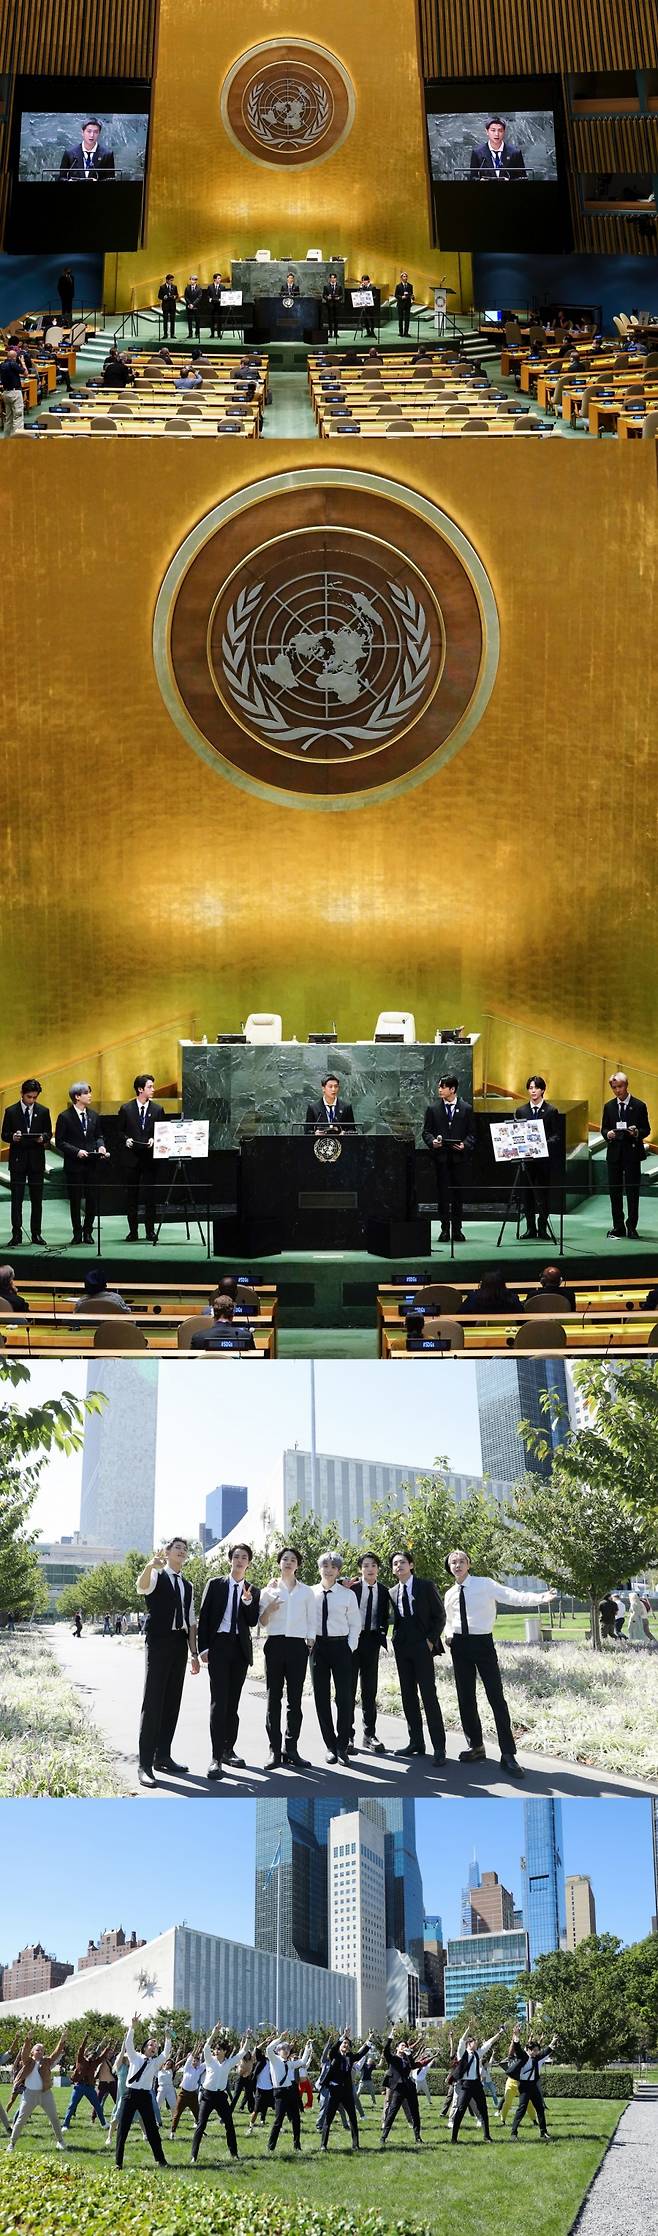 I thought the world had stopped, but its moving forward a little bit - I believe all Choices are the beginning of change.Group BTS attended the 76th United Nations General Assembly as a presidential SEK envoy for future generations and culture and delivered the thoughts and stories of future generations to all worlds.BTS was the speaker on behalf of you and future generations at the opening session of the United Nations General Assembly SEK event Sustainable Development Goals (SDG) Moment held at 9 p.m. on the 20th (8 a.m. in the eastern United States), and all members spoke in Korean.BTS, who will speak at United Nations for the third time this year following 2018 and 2020, has now claimed to be The Messenger, which delivers the voices of future generations to the former World.In particular, BTS, who asked the official SNS before attending the United Nations General Assembly, What was your last two years and what kind of world you are living in now?, He introduced various pictures and articles from the former World and voiced his voice on behalf of future generations.BTS, which was introduced to the podium by President Moon Jae-in, who spoke at the opening ceremony of the Sustainable Development Goals (SDG) Moment held at the United Nations General Assembly, shared and admired the photos of future generations of the environment, such as climate change, and the stories of those who started studying and working healthier in a new way.BTS said in a story of future generations who are courageously challenging, The name Welcome Generation is more appropriate than Lost Generation due to Corona.It means a generation walking forward, saying Welcome rather than being afraid of change.They also mentioned the importance of vaccination, saying, The day is not far from face to face. All Choices are the beginning of change.I would like to tell each other Welcome! In a new world.Following the speech, BTS also offered performance, drawing the attention of former Worlds.The members started at the United Nations General Assembly meeting hall, followed by the lobby of the General Assembly, the entrance to the Government Complex, and the grass plaza.The BTS in a black suit unfolded a performance brightly and lightly.In particular, after seven members moved the stage outdoors through the entrance of seven different United Nations Government Complex, there is an evaluation that the free and youthful charm unique to Permission to Dance was more prominent.In the second half of the song on the grass square, a lot of dancers joined.BTS peaked at the 76th United Nations General Assembly with performance using international sign language, which means pleasant, dance, and peace with dancers.